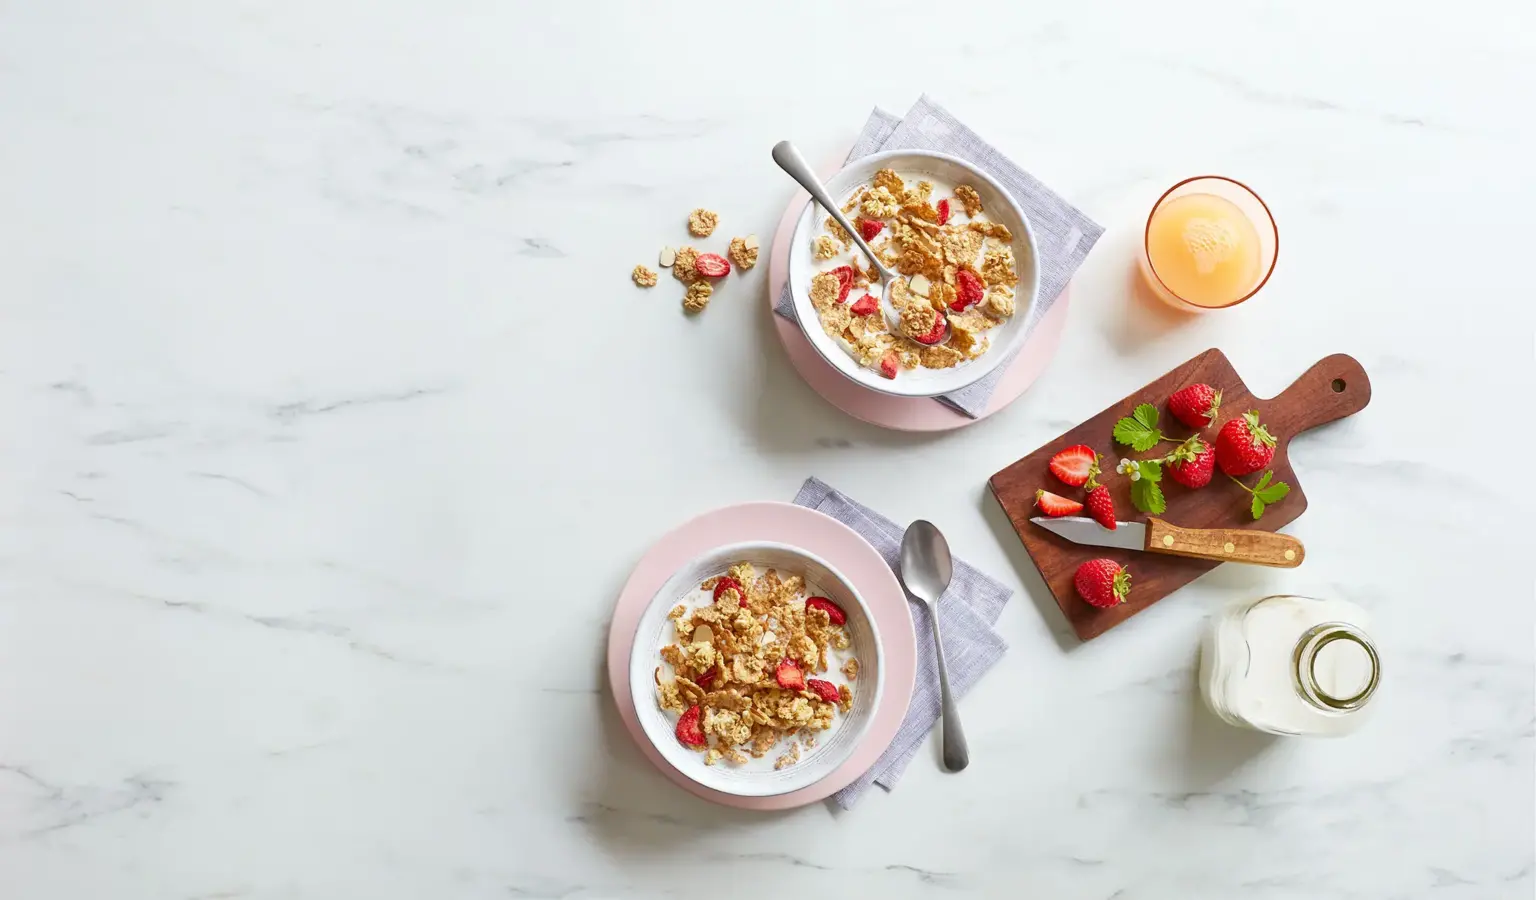 Bowls of Post cereal and strawberries on a countertop